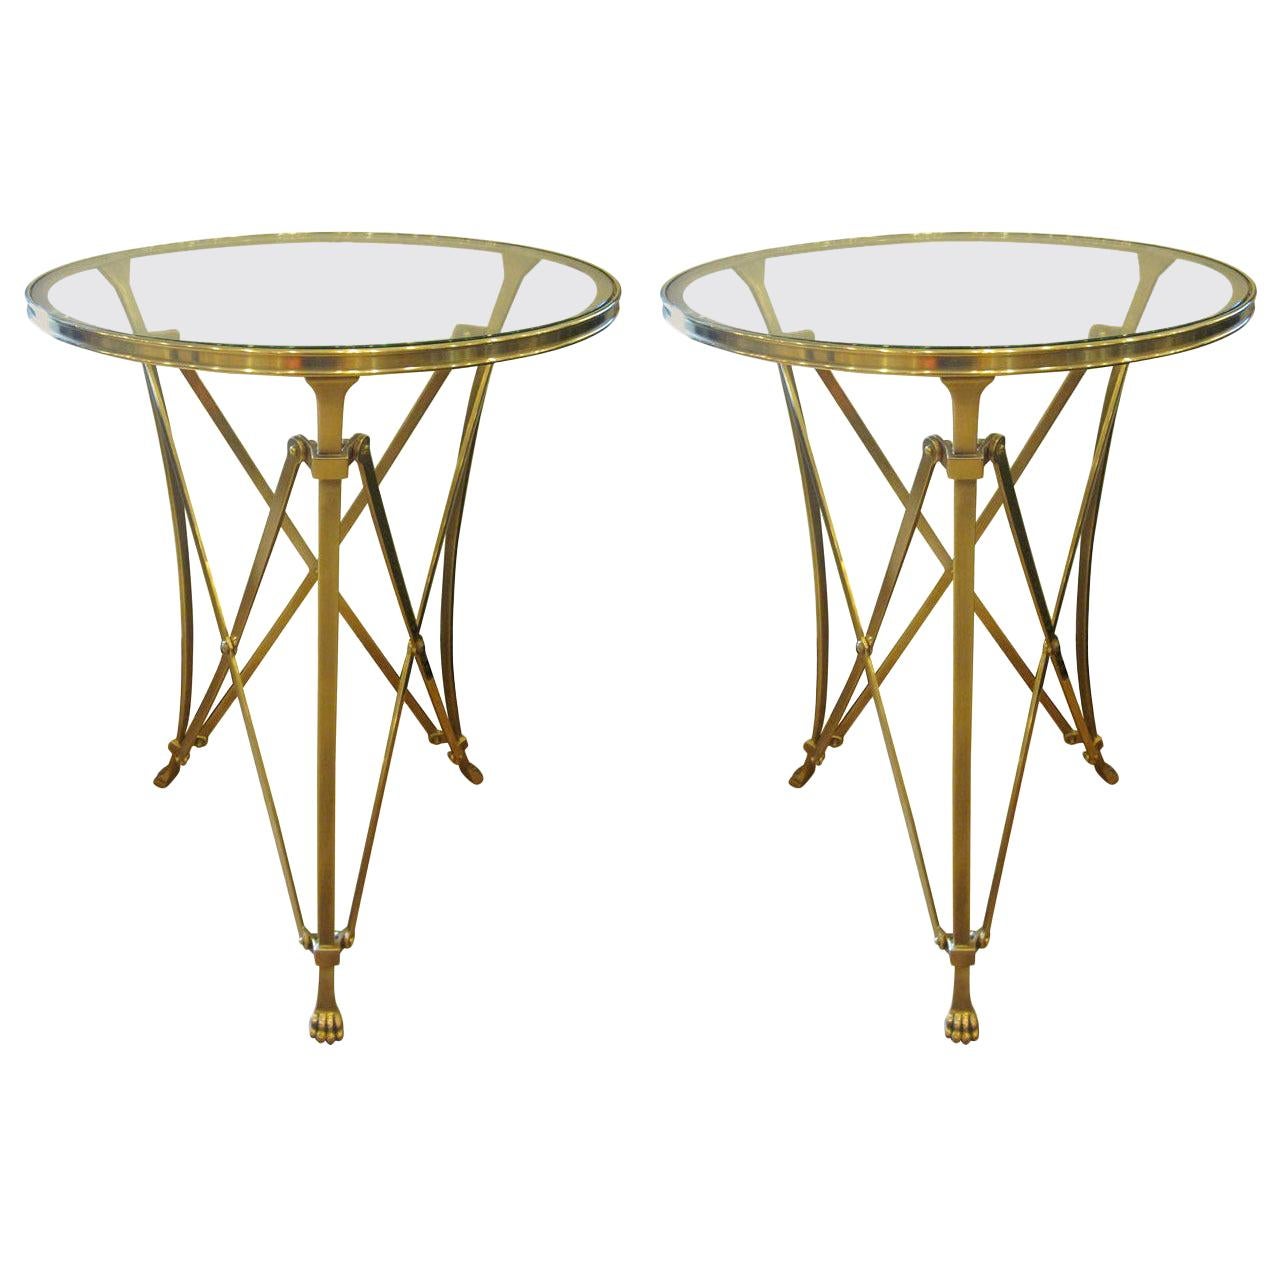 2 French Mid-Century Modern Neoclassical Style Brass End Tables, Maison Ramsay